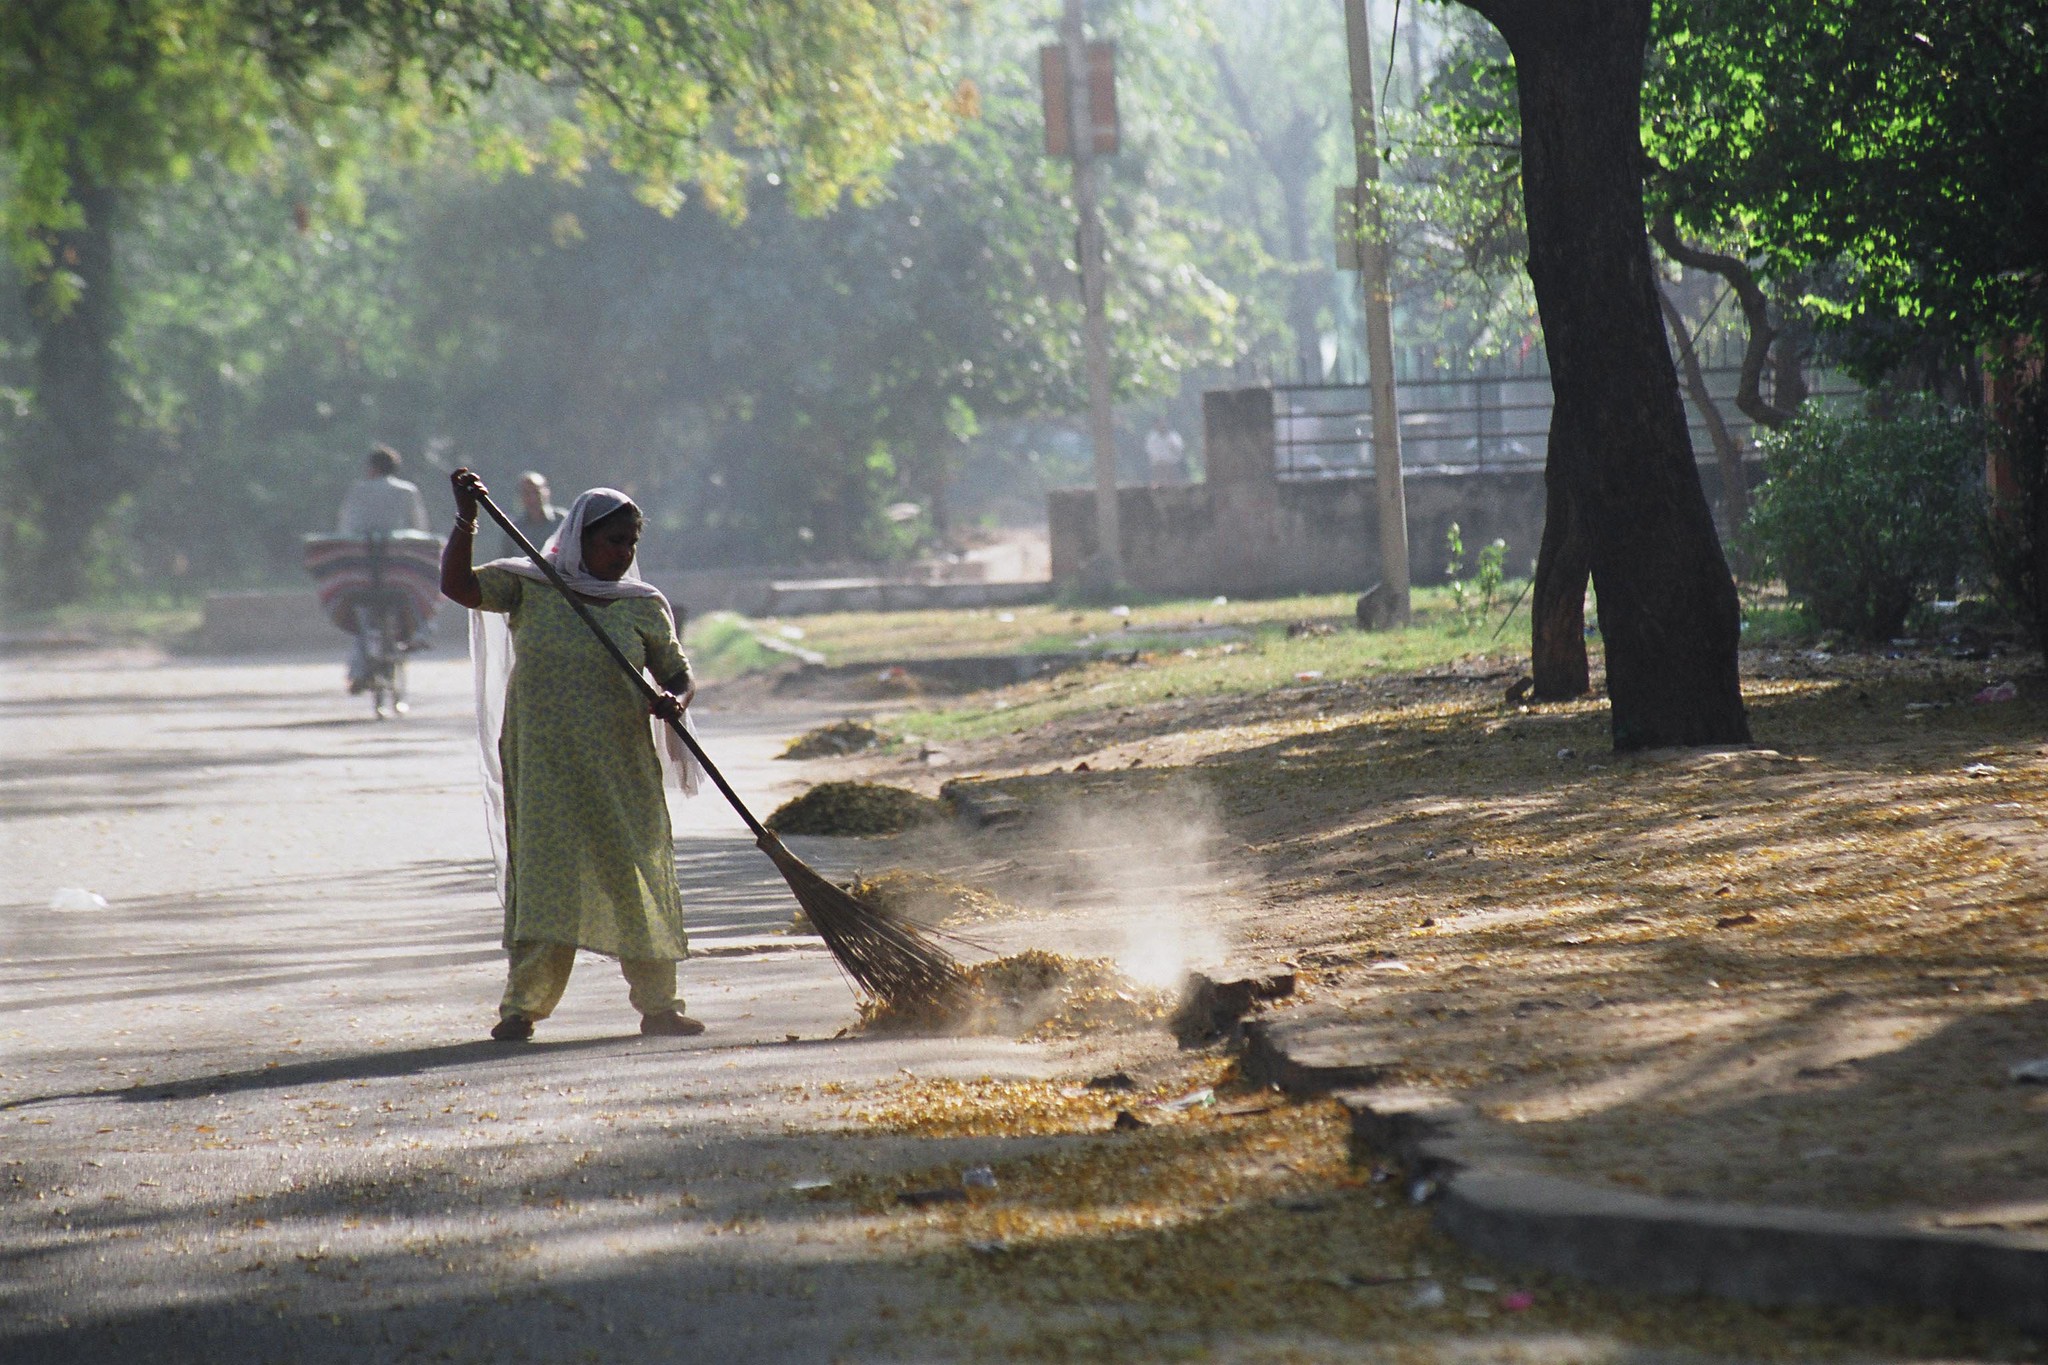 6 o'clock in the morning, domestic worker sweeping the street in front of a private property in the Golf Links area, Delhi.